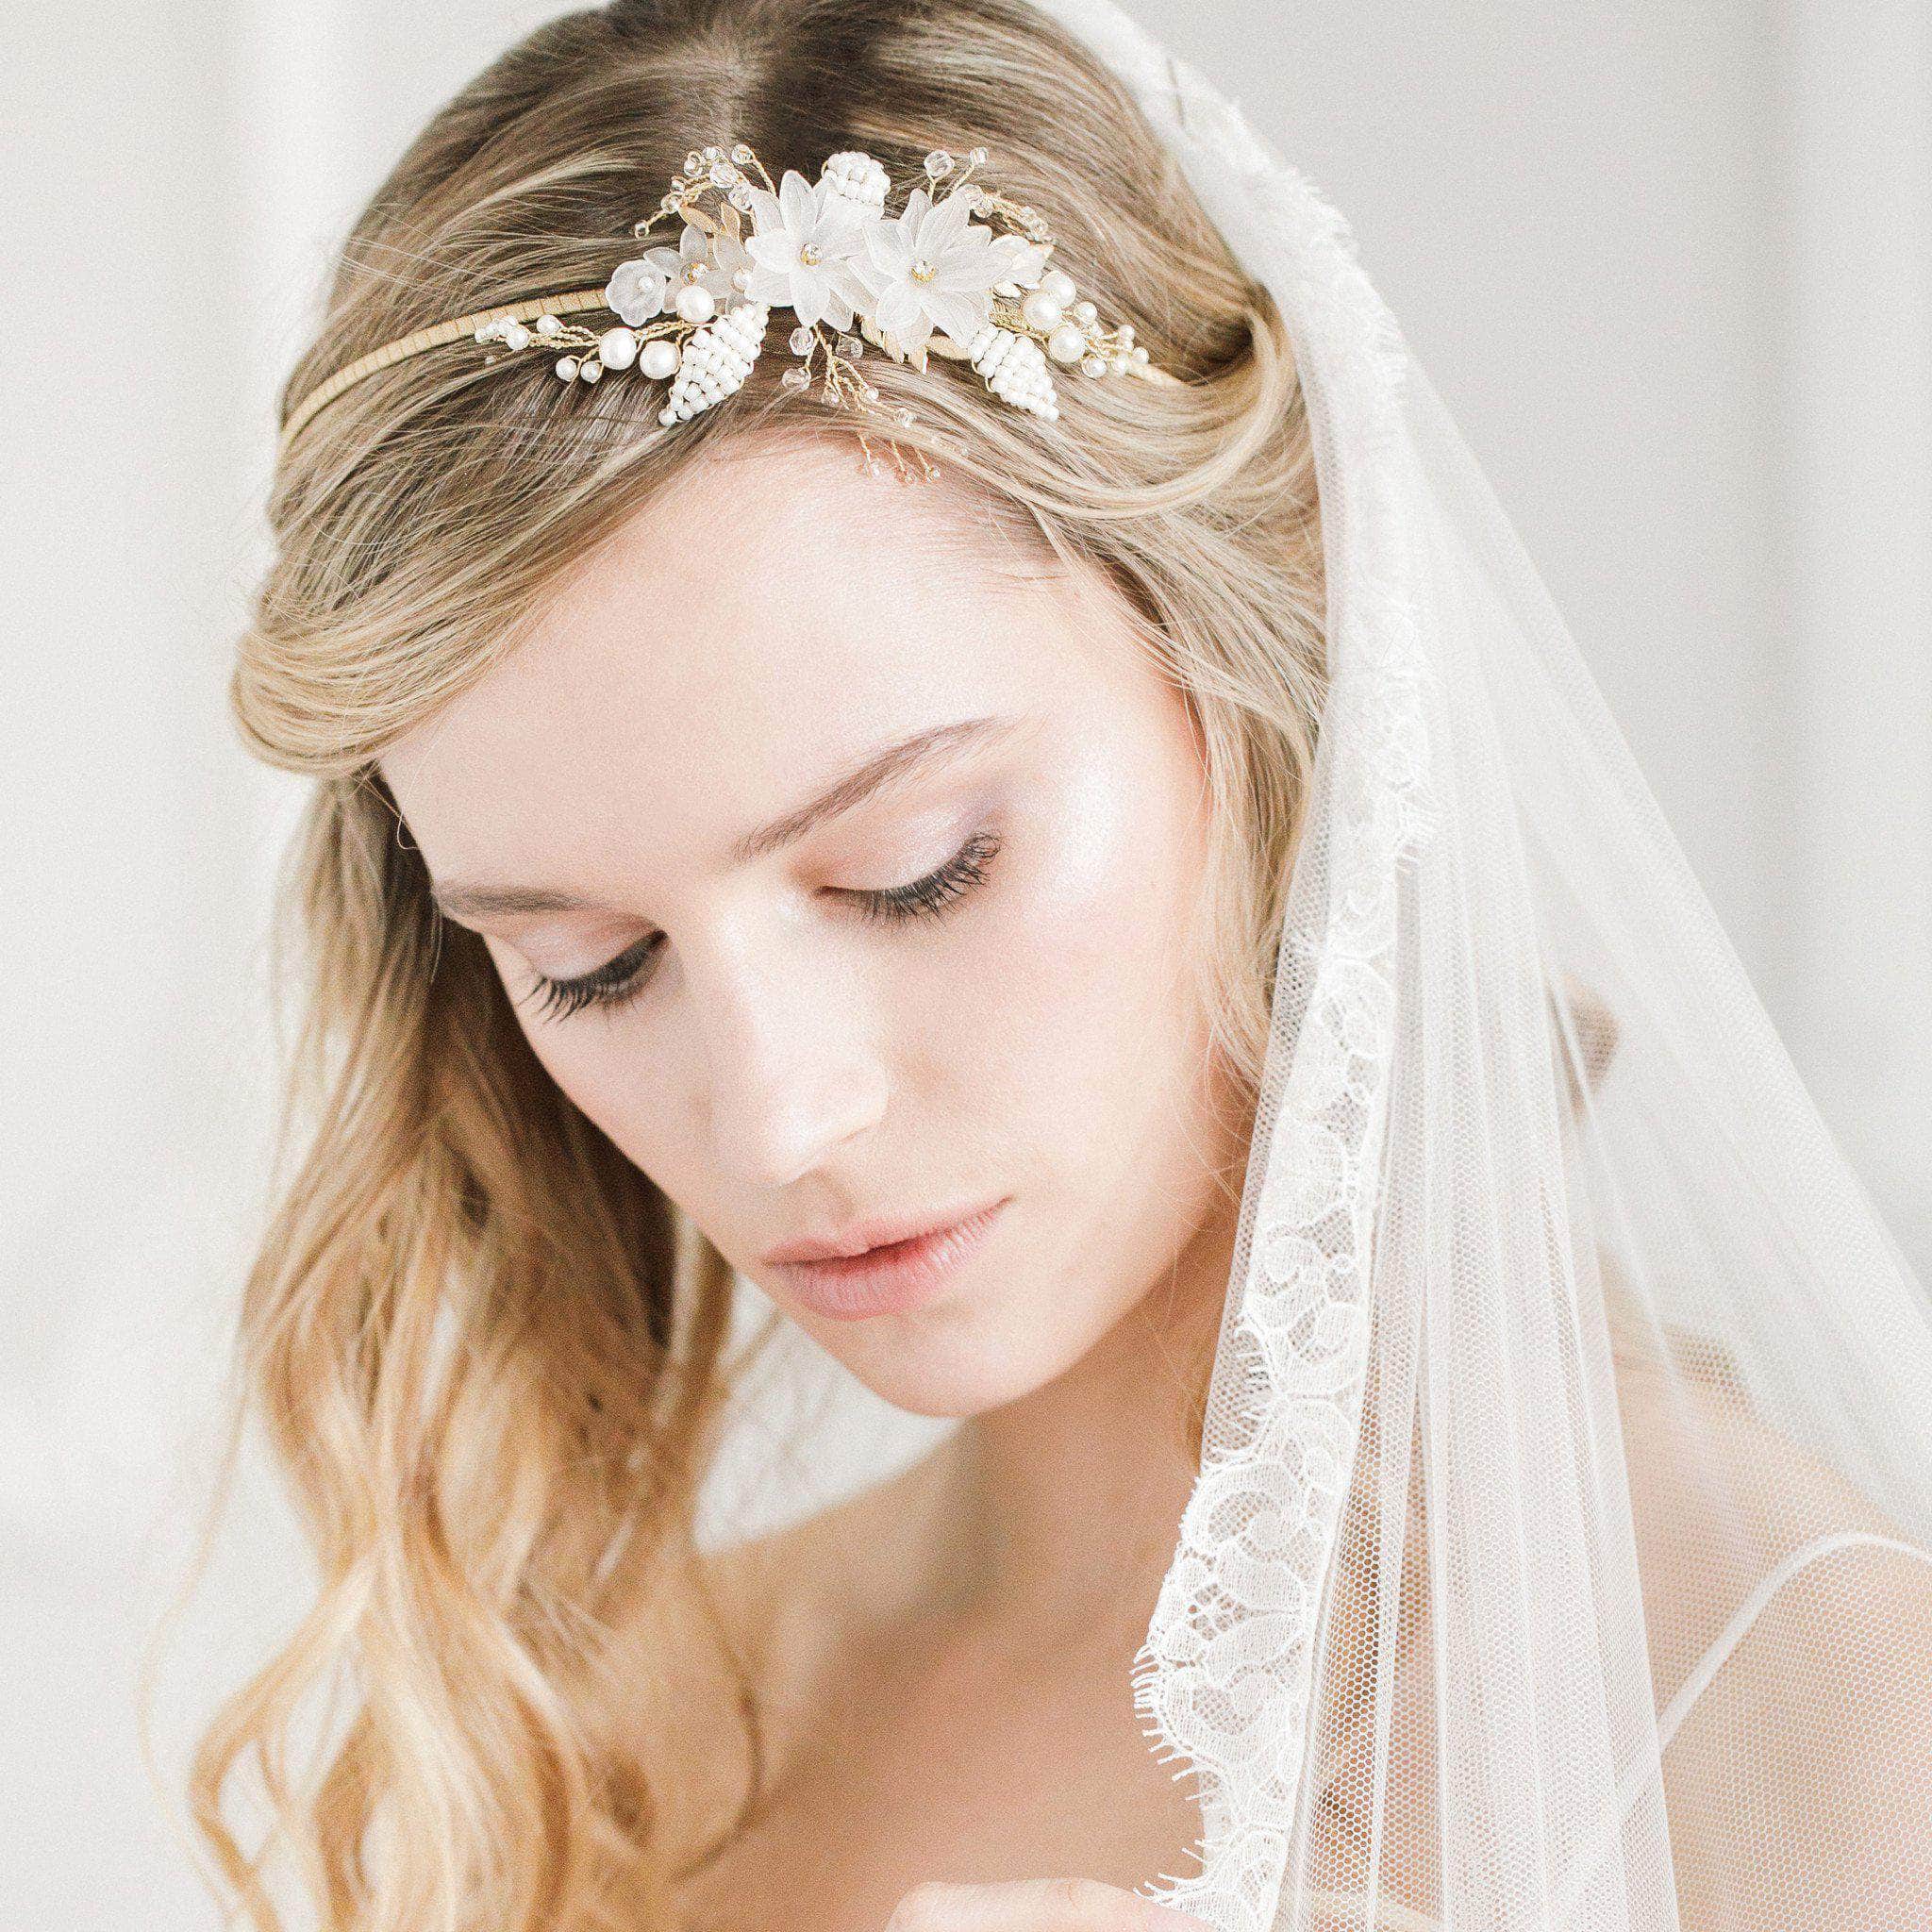 Statement Headpieces & Advice On Choosing The Perfect Wedding